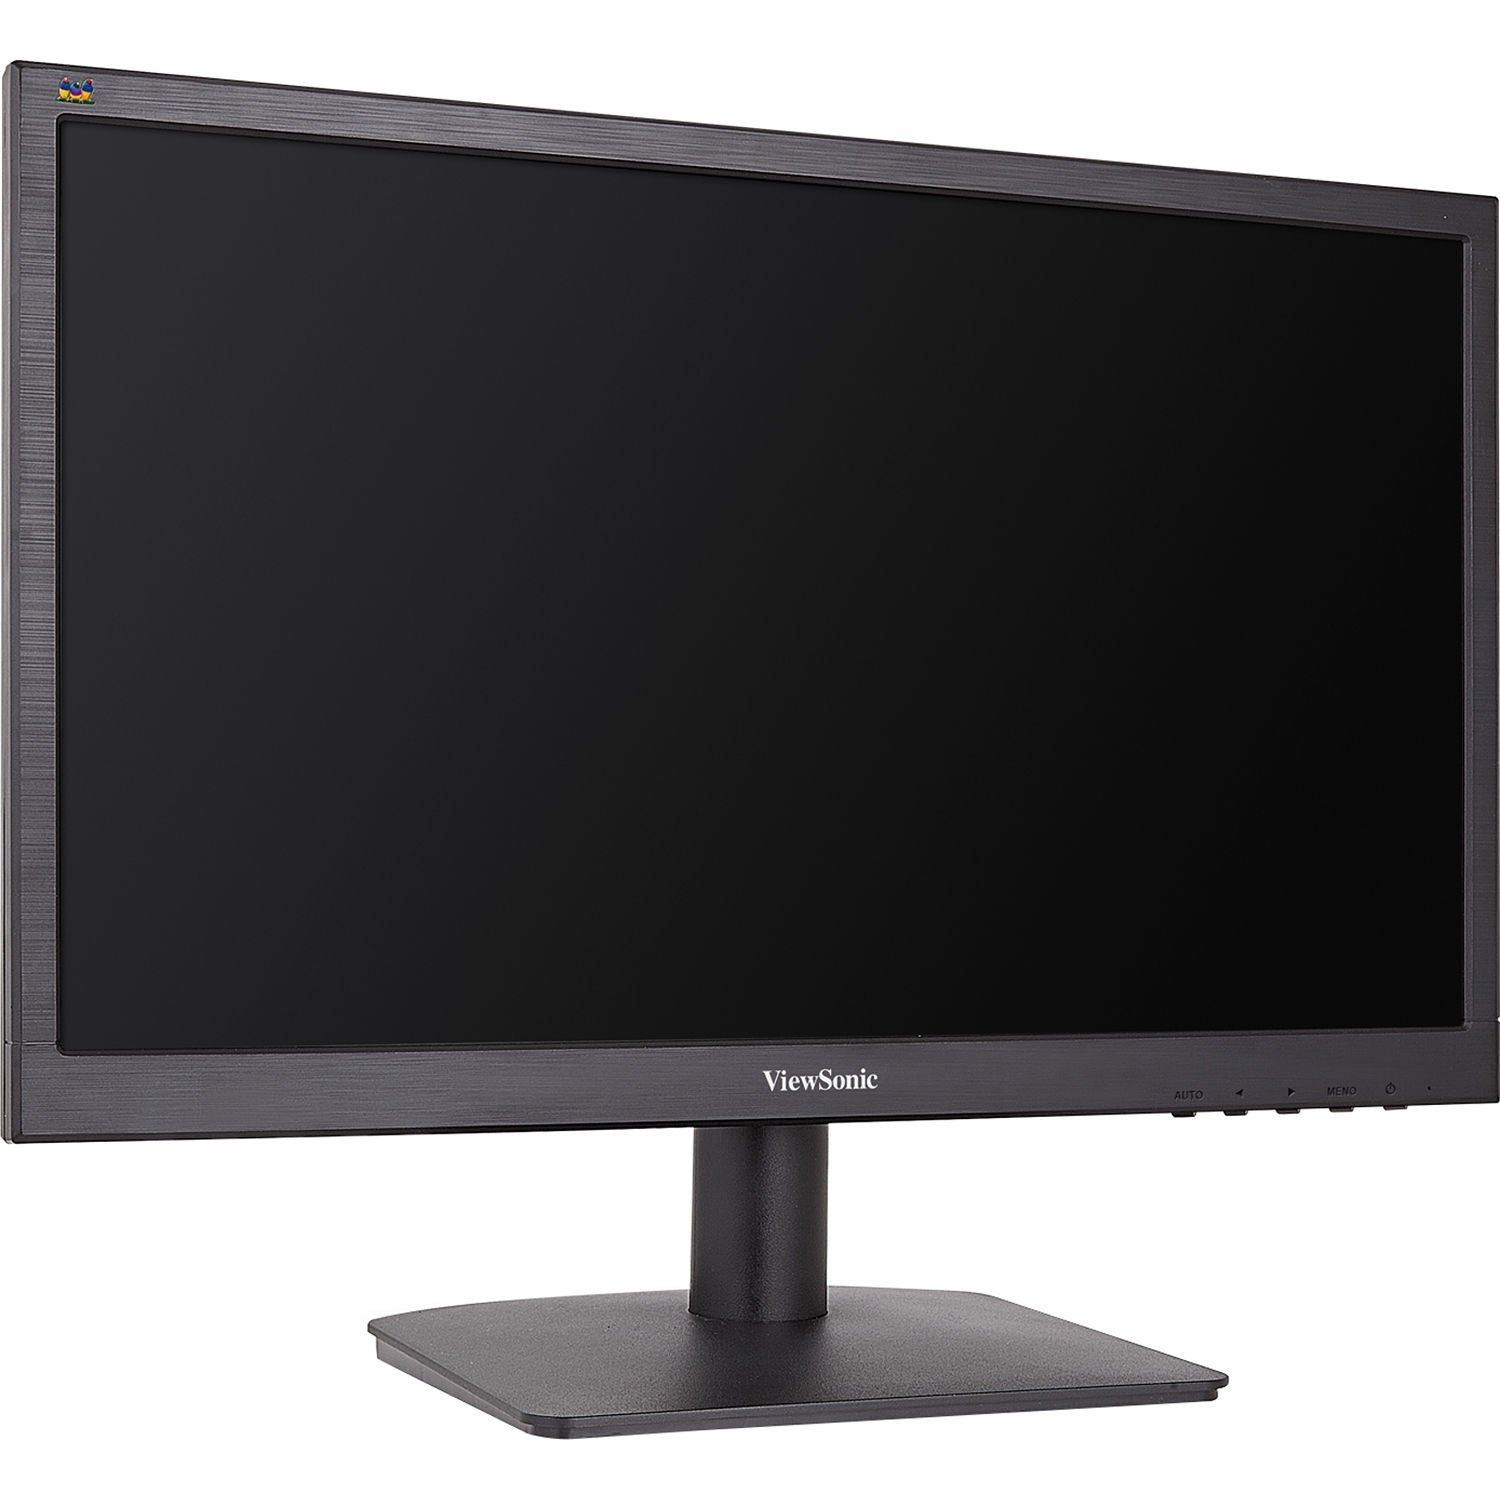 ViewSonic VA1903H-R 19" Home and Office Monitor - Certified Refurbished